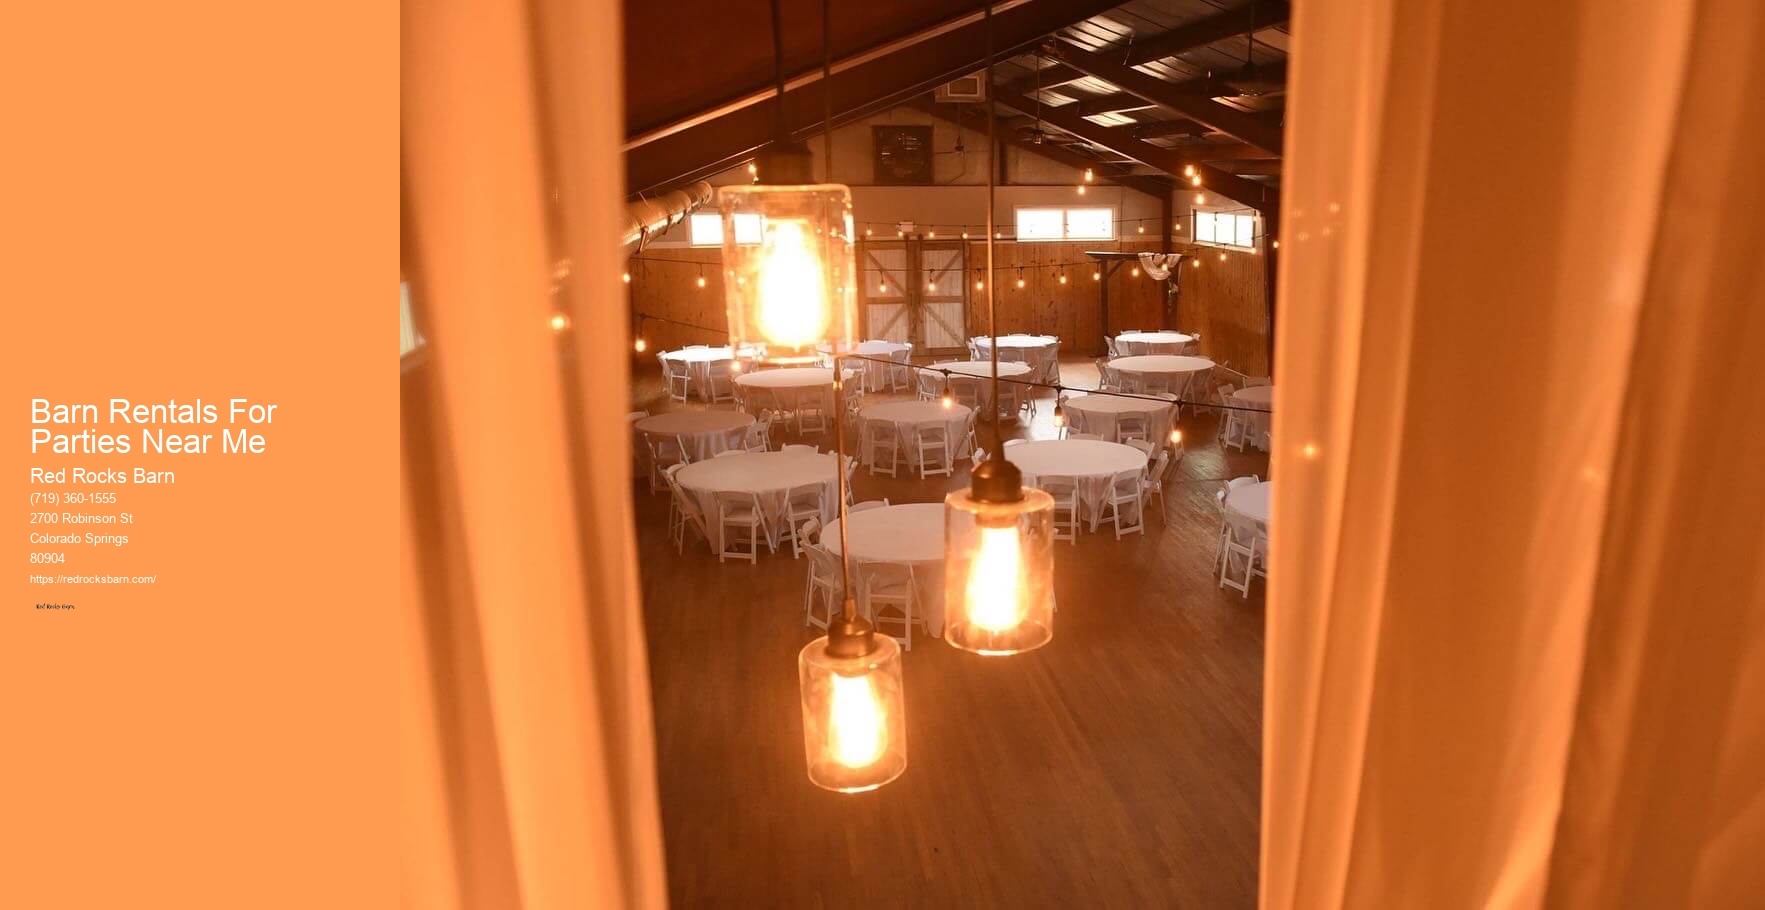 Barn Rentals For Parties Near Me